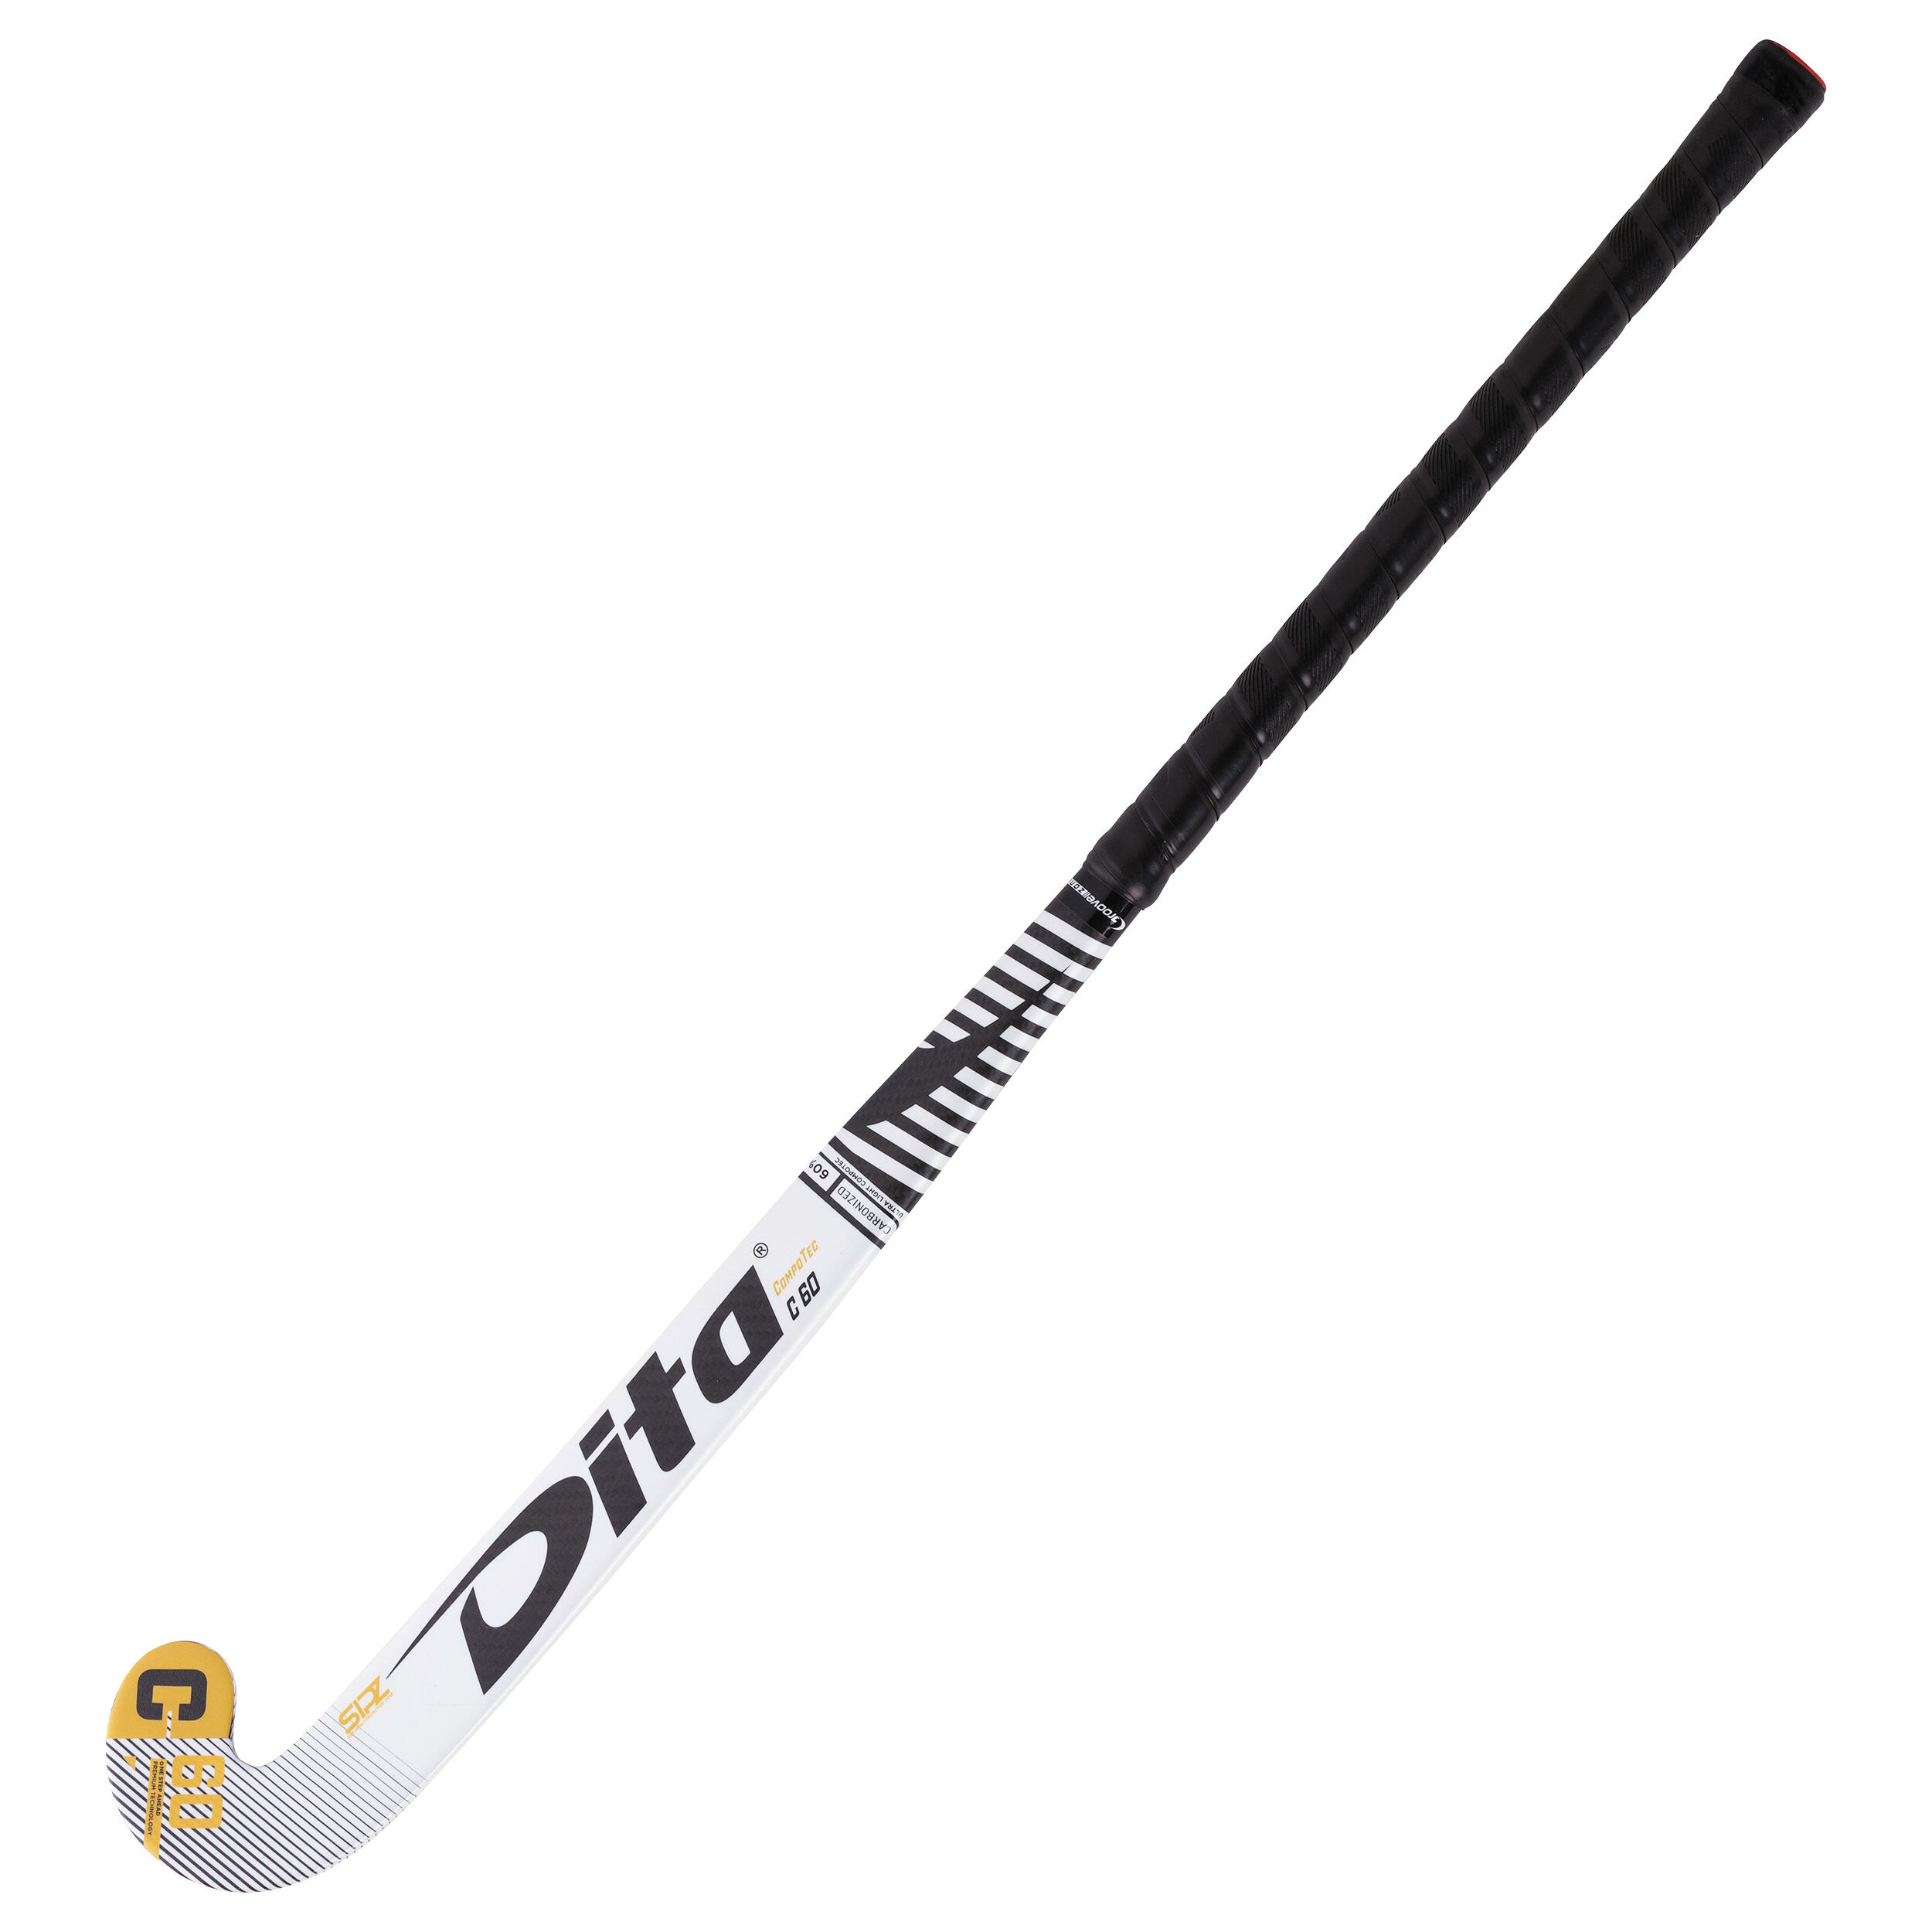 Adult Field Hockey Advanced 60% Carbon X-Low Bow Stick CompotecC60 - White/Black 4/12